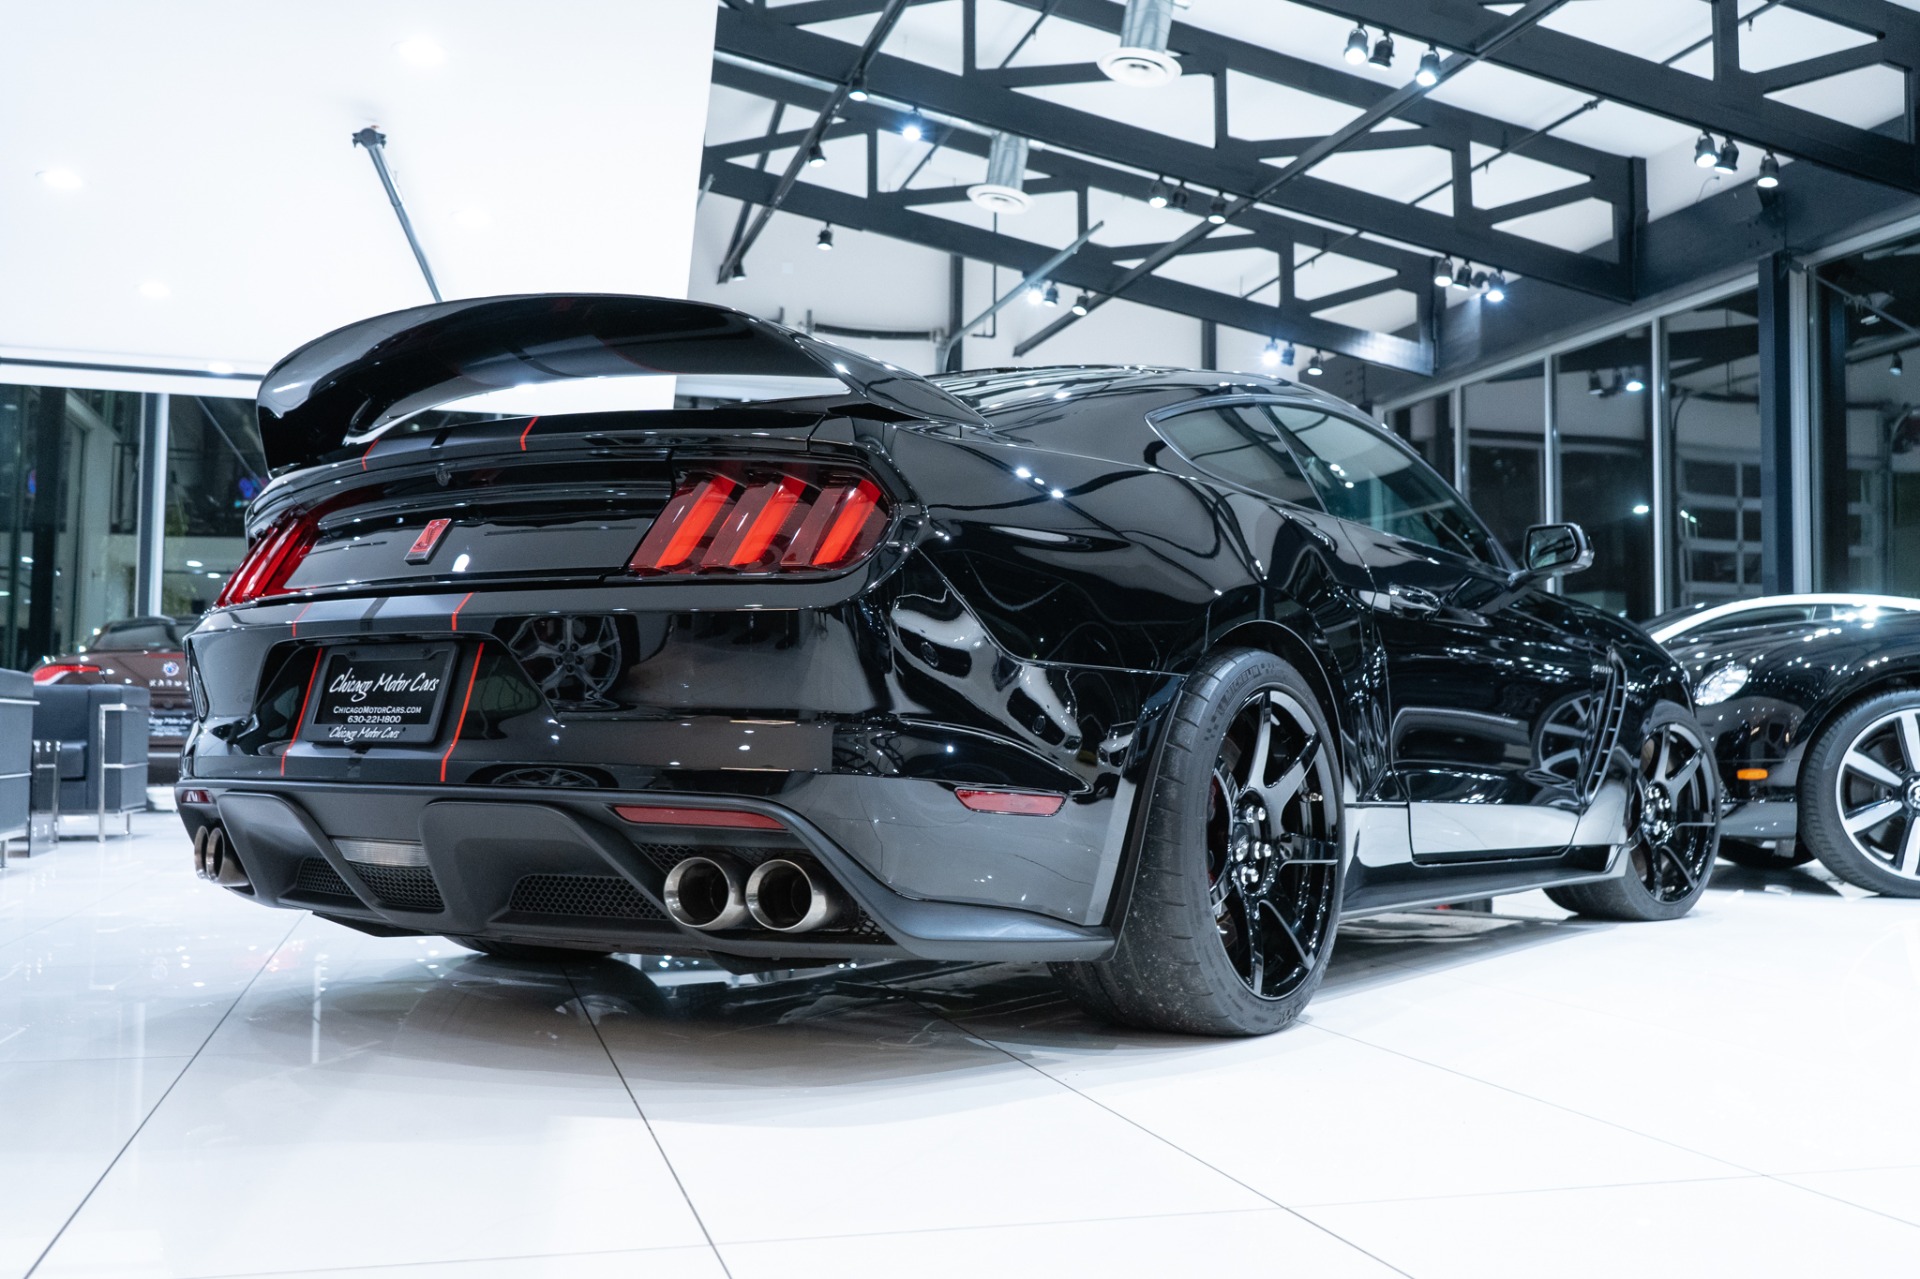 Used-2019-Ford-Mustang-Shelby-GT350R-Coupe-Only-600-Miles-LOADED-Super-RARE-B-O-Sound